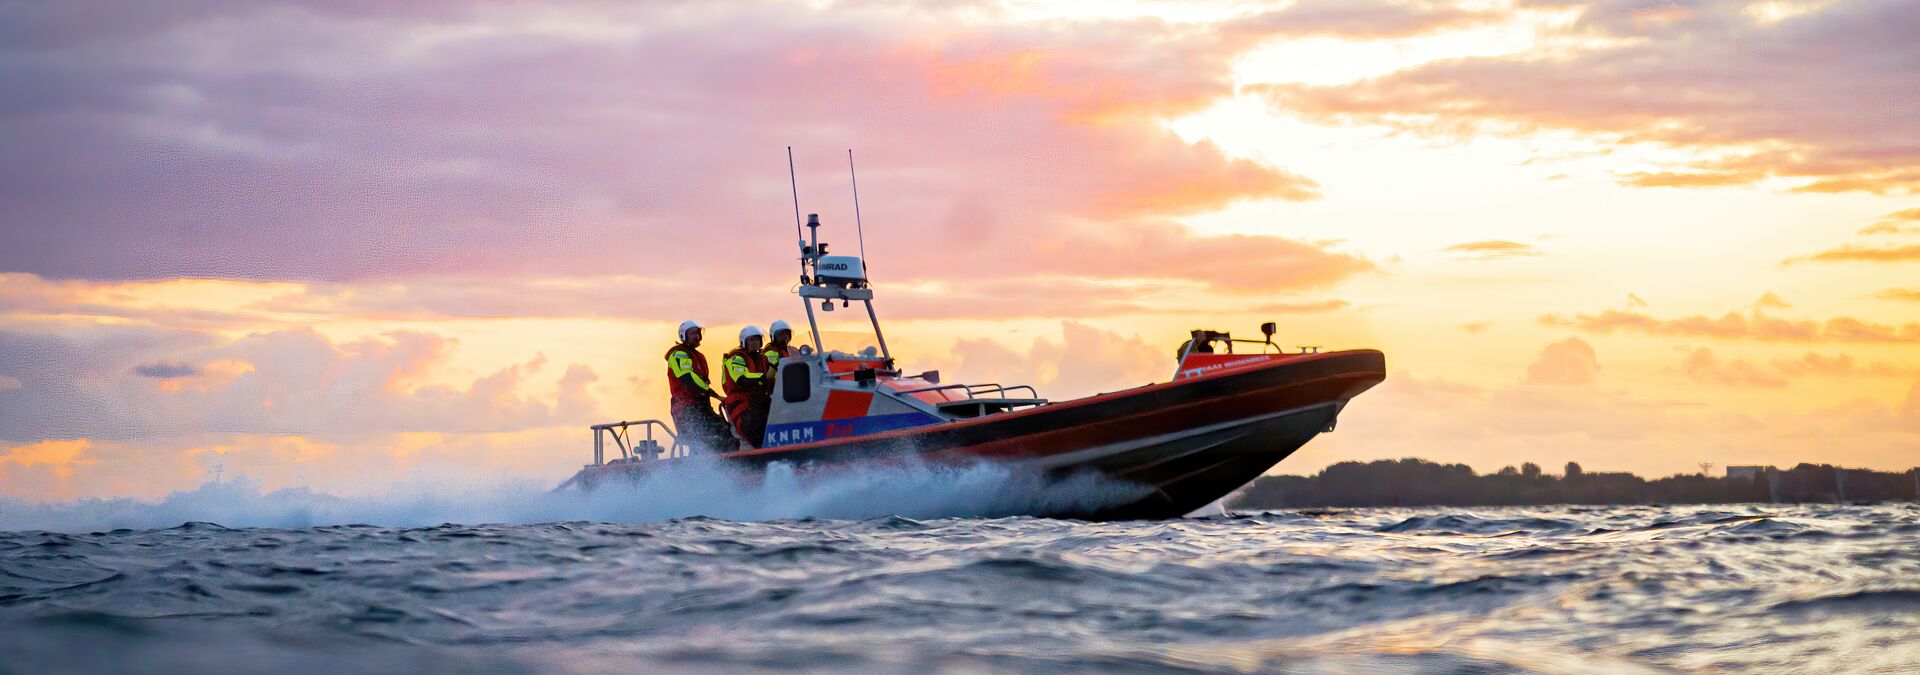 The Royal Netherlands Sea Rescue Institution’s Engagement Success Story